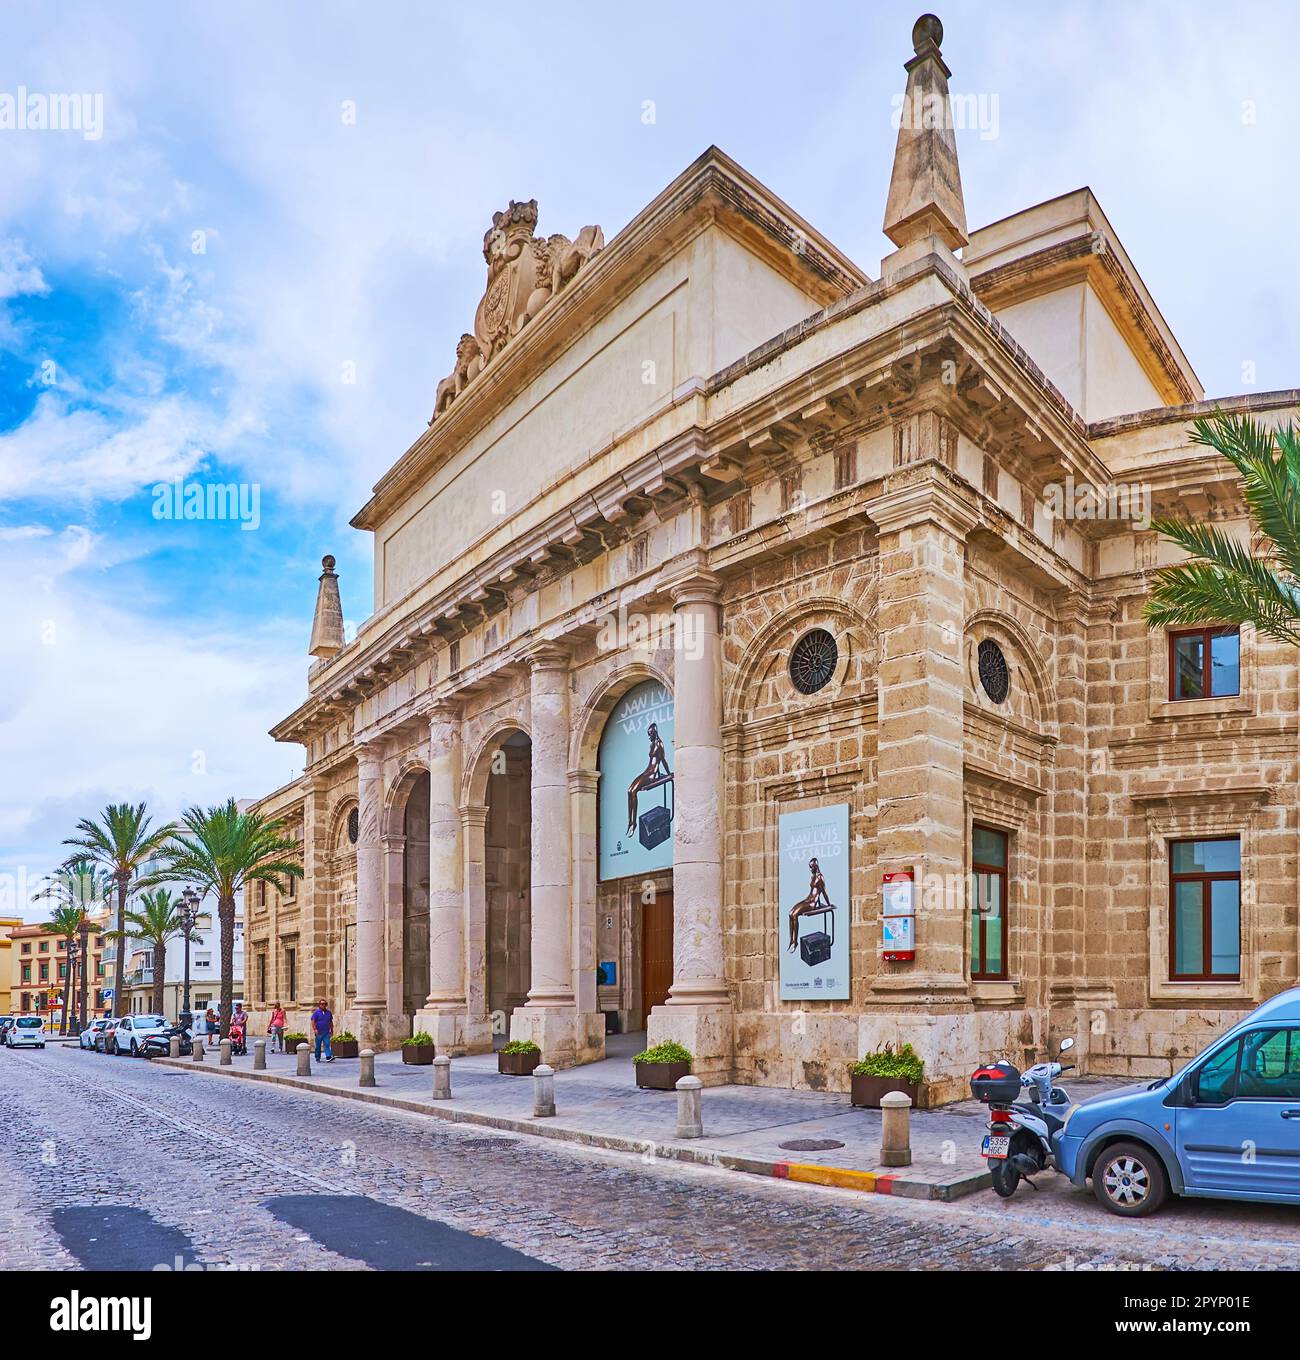 CADIZ, SPAIN - SEPT 21, 2019: The facade of Ibero-American House, the cultural center, located on Calle Concepcion Arenal, on Sept 21 in Cadiz Stock Photo